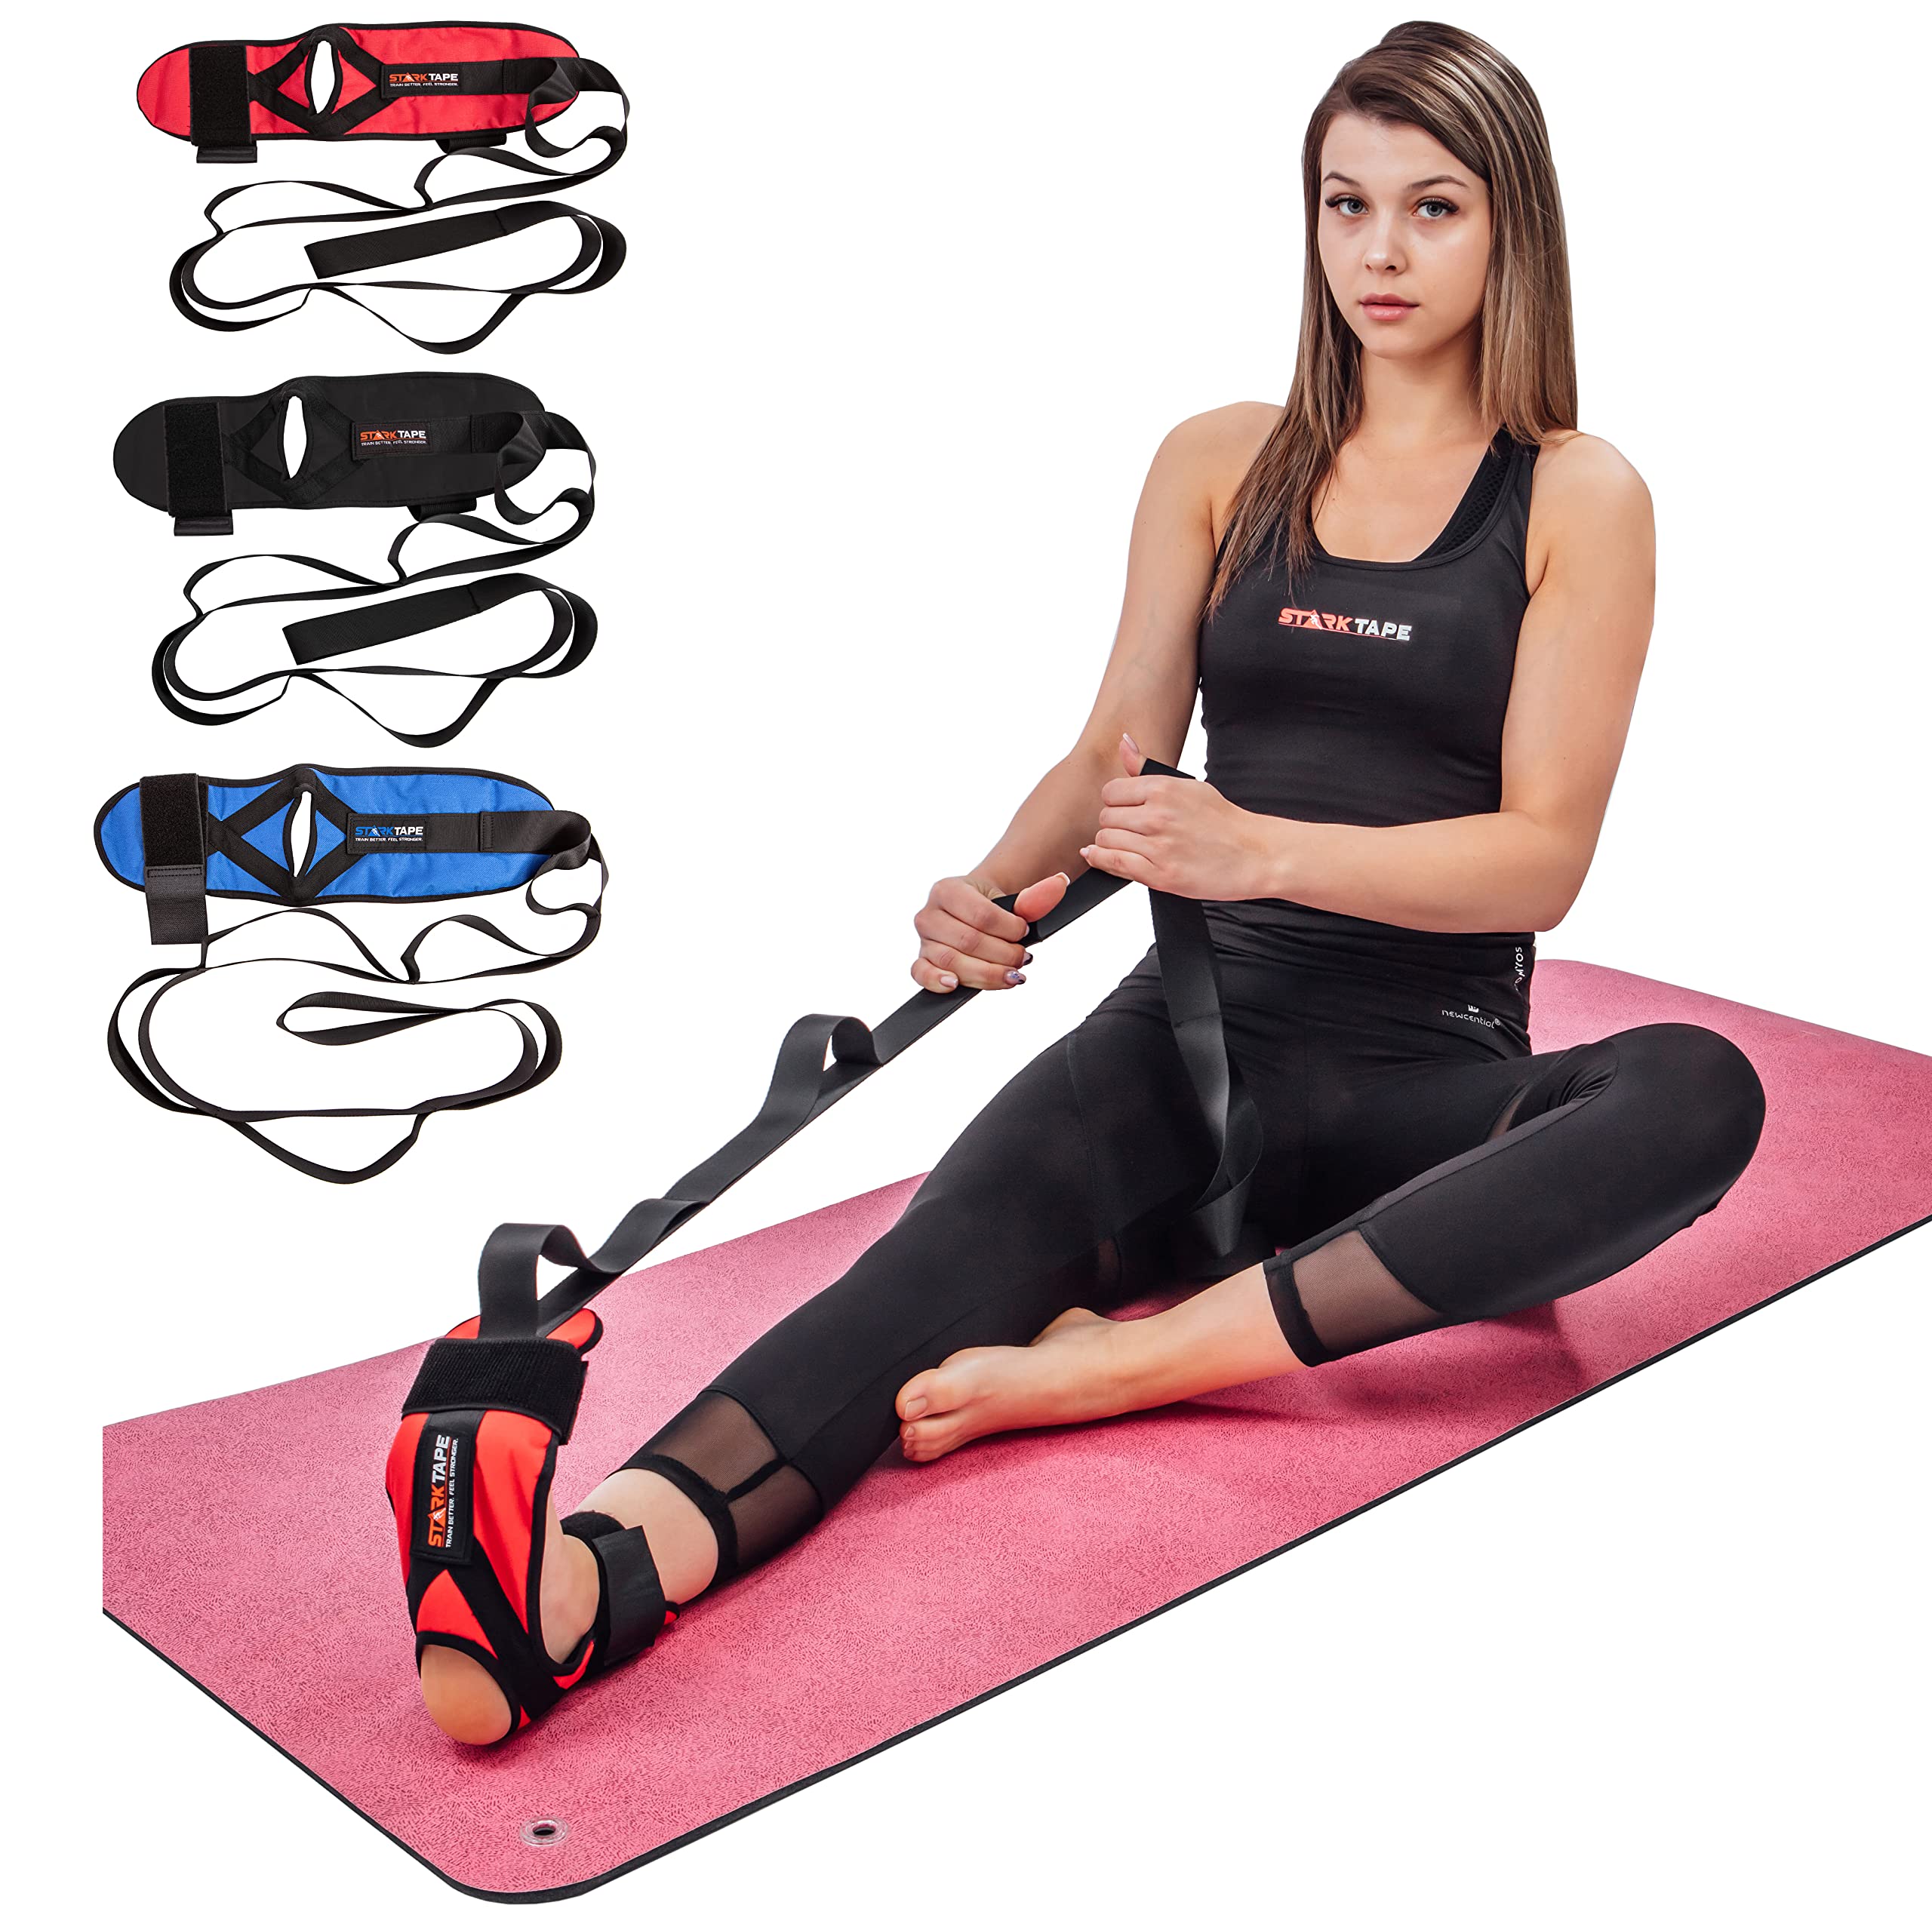 Starktape Foot and Leg Stretcher. Stretching Strap Loops for